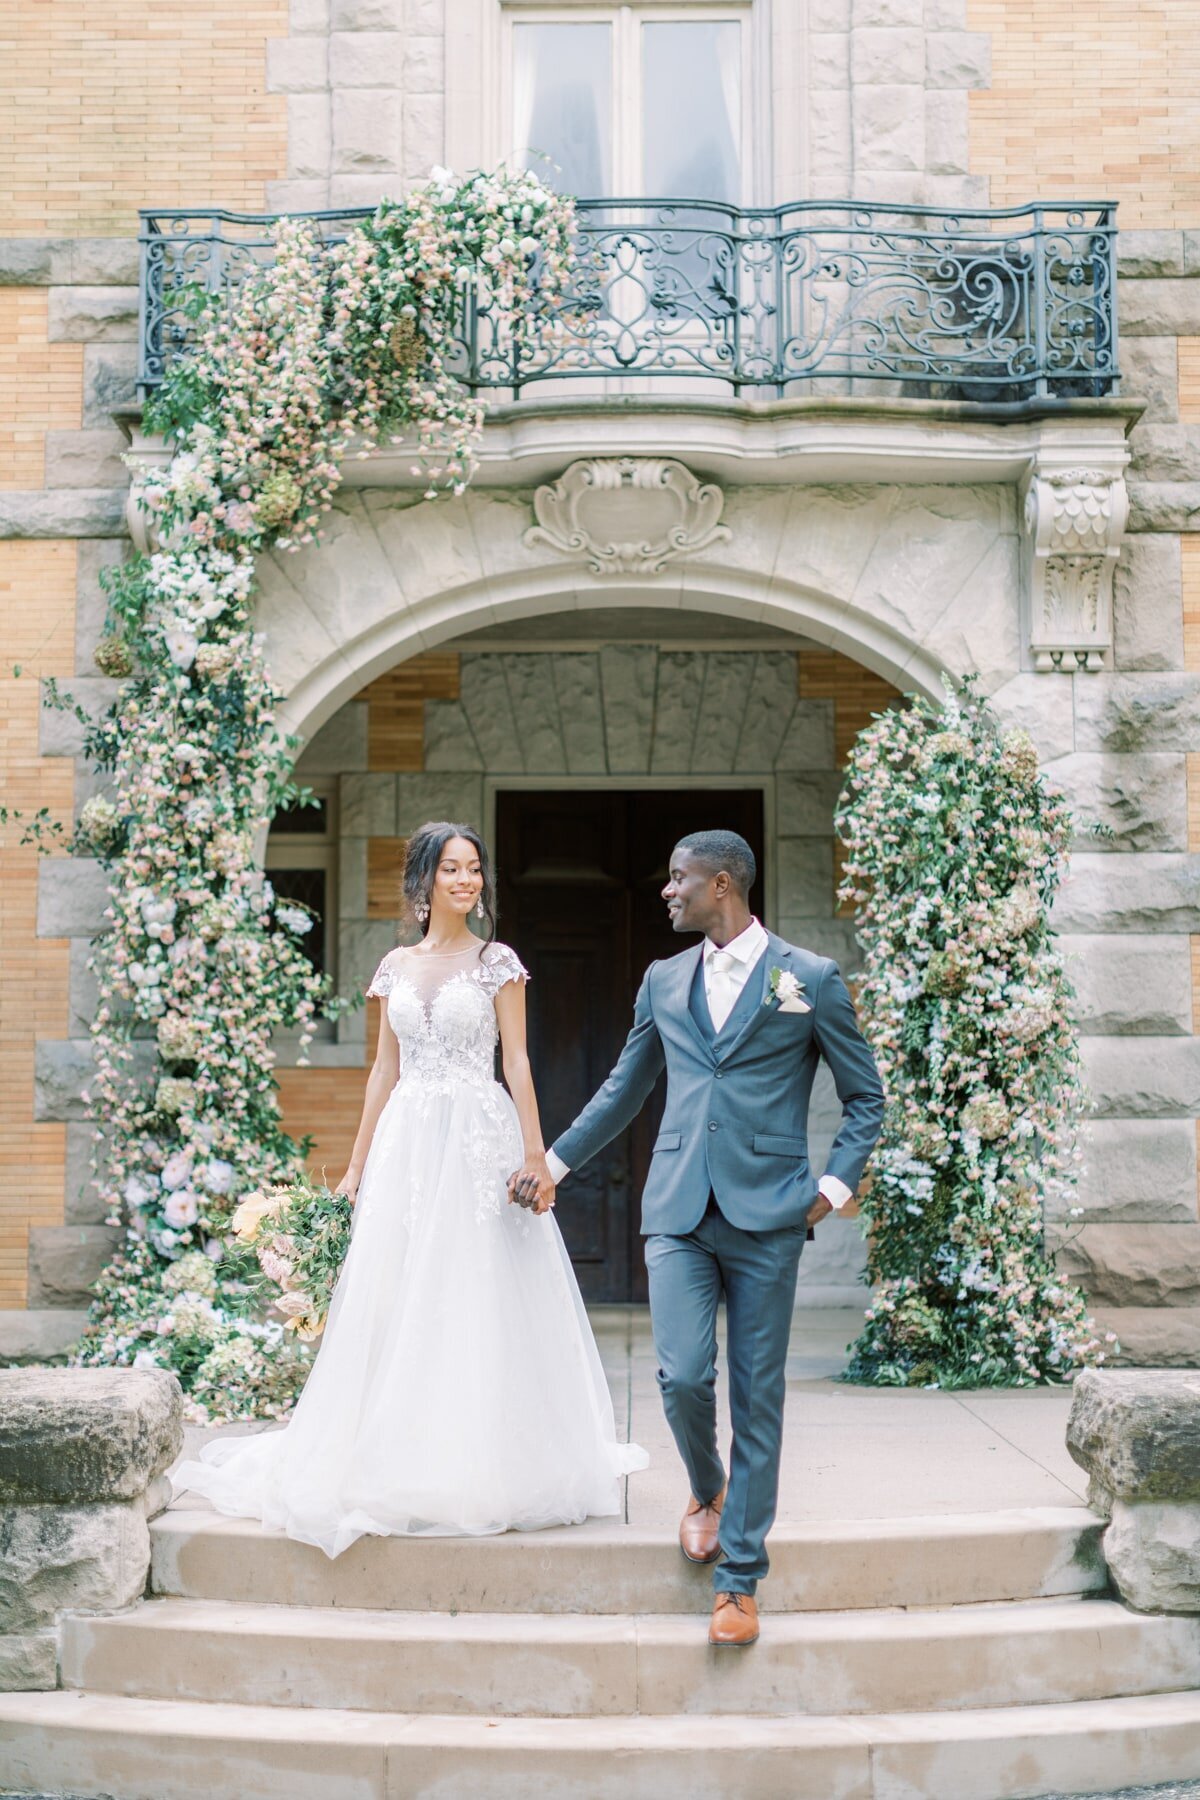 Bride and groom walk hand in hand down stairs of a stunning, brick venue with a flower arch.